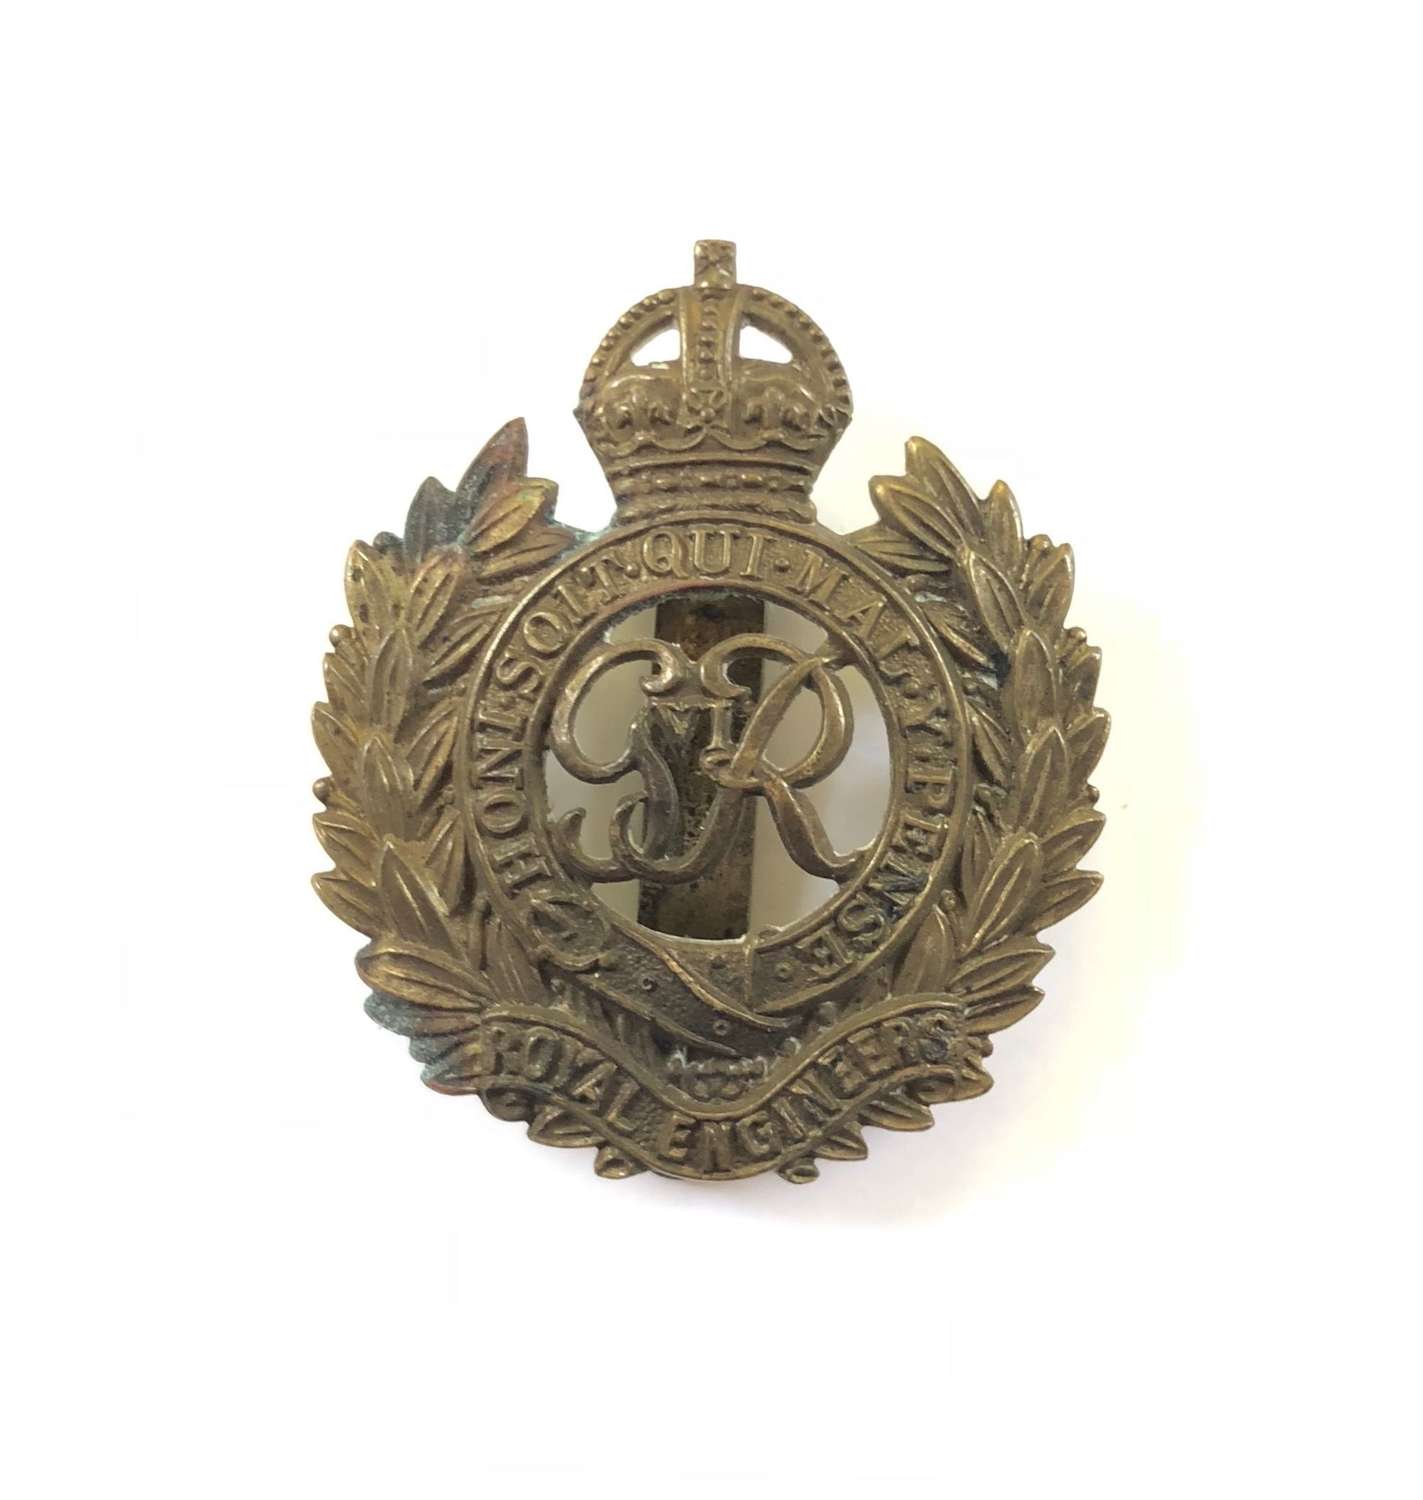 WW2 Pattern Royal Engineers Other Rank’s Cap Badge.